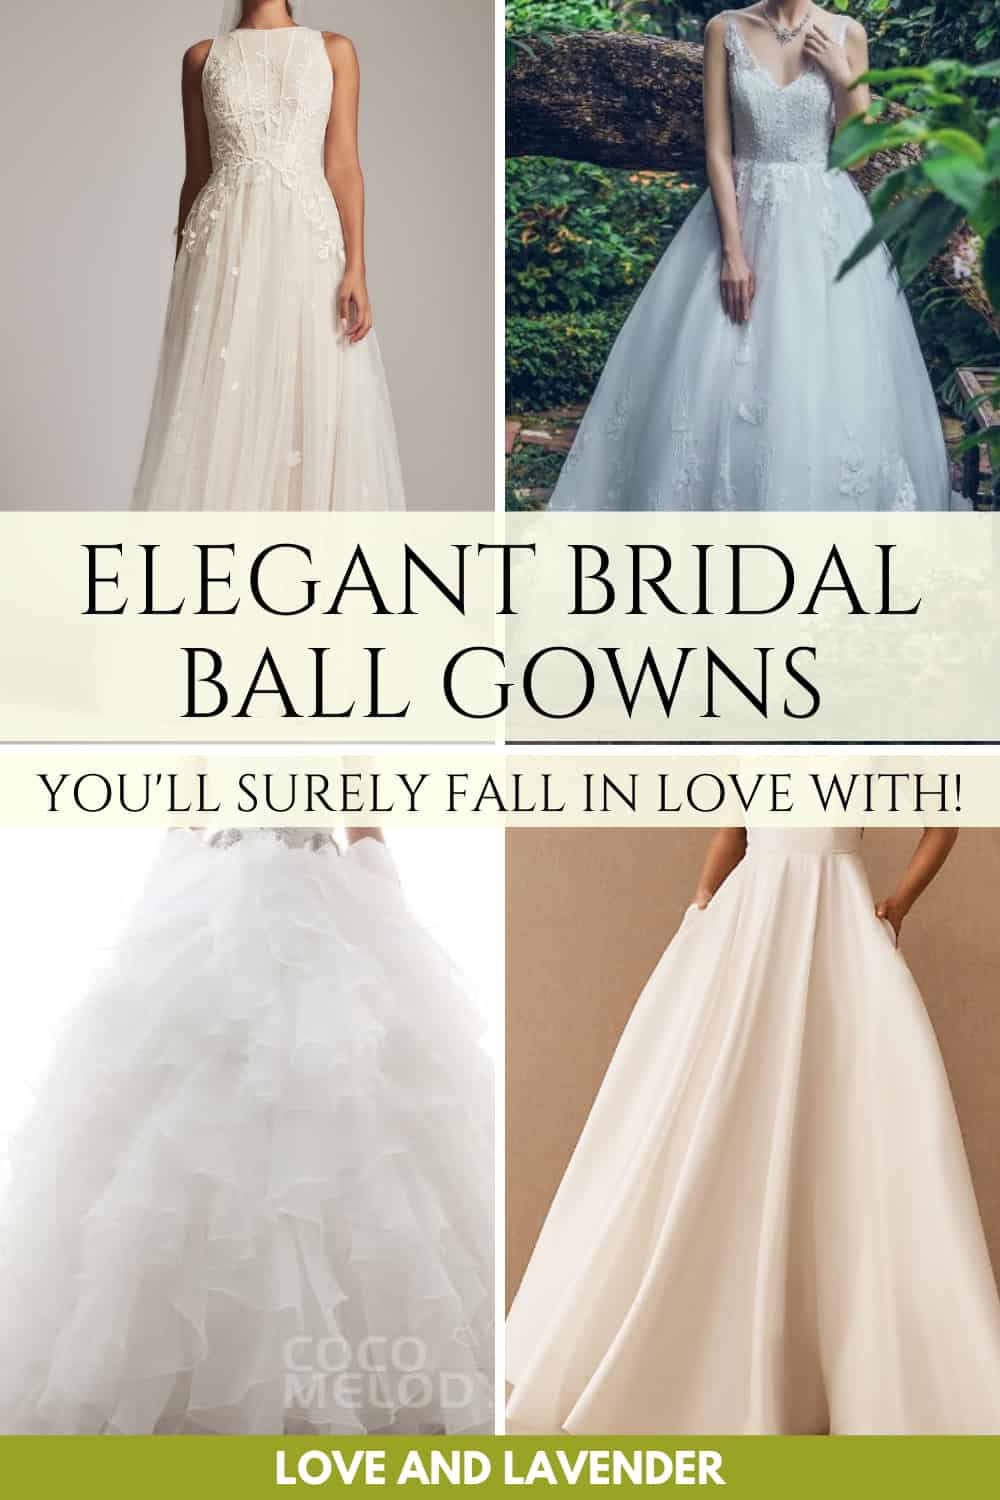 16 of the Best Ball Gown Wedding Dresses for Your Big Day